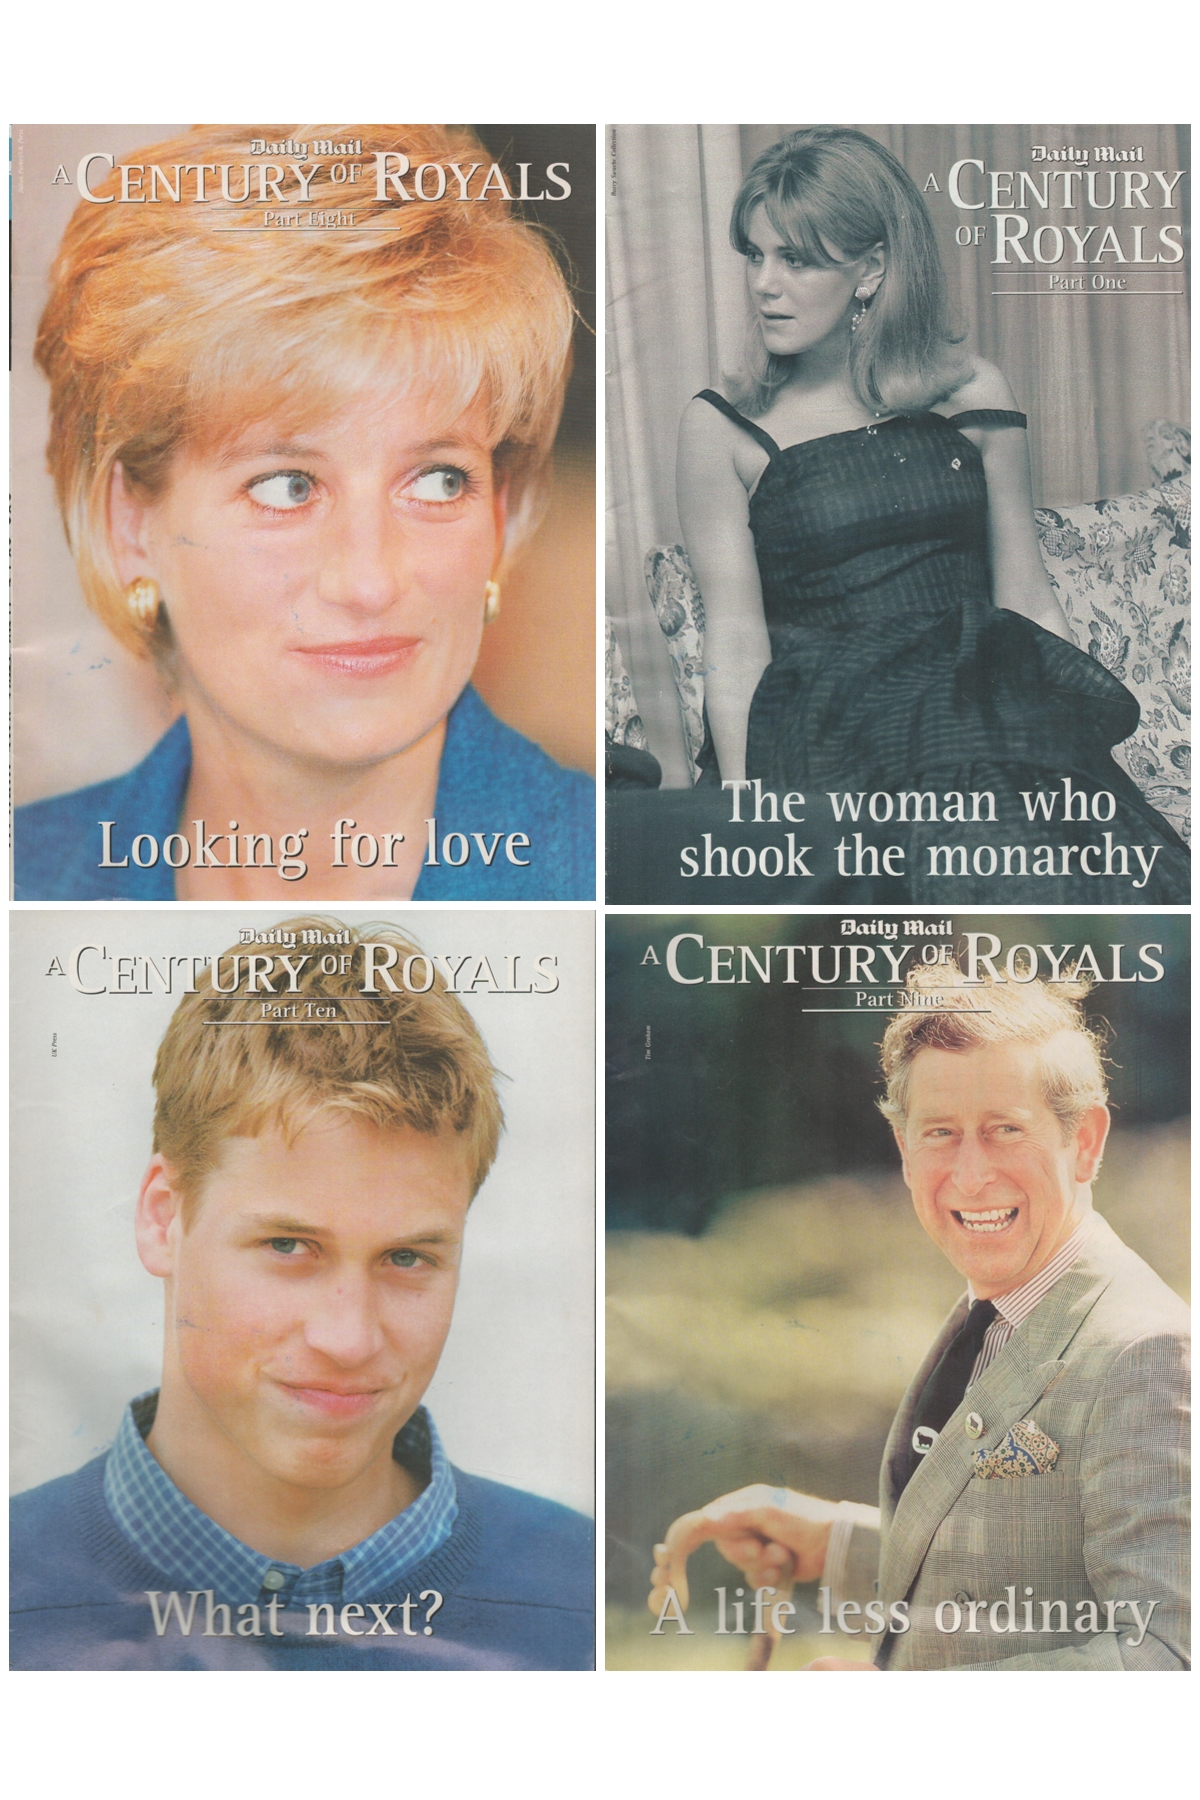 Century Of Royals magazine collection by The Daily Mail, 10 in total including all issues part 1 10. - Image 5 of 6